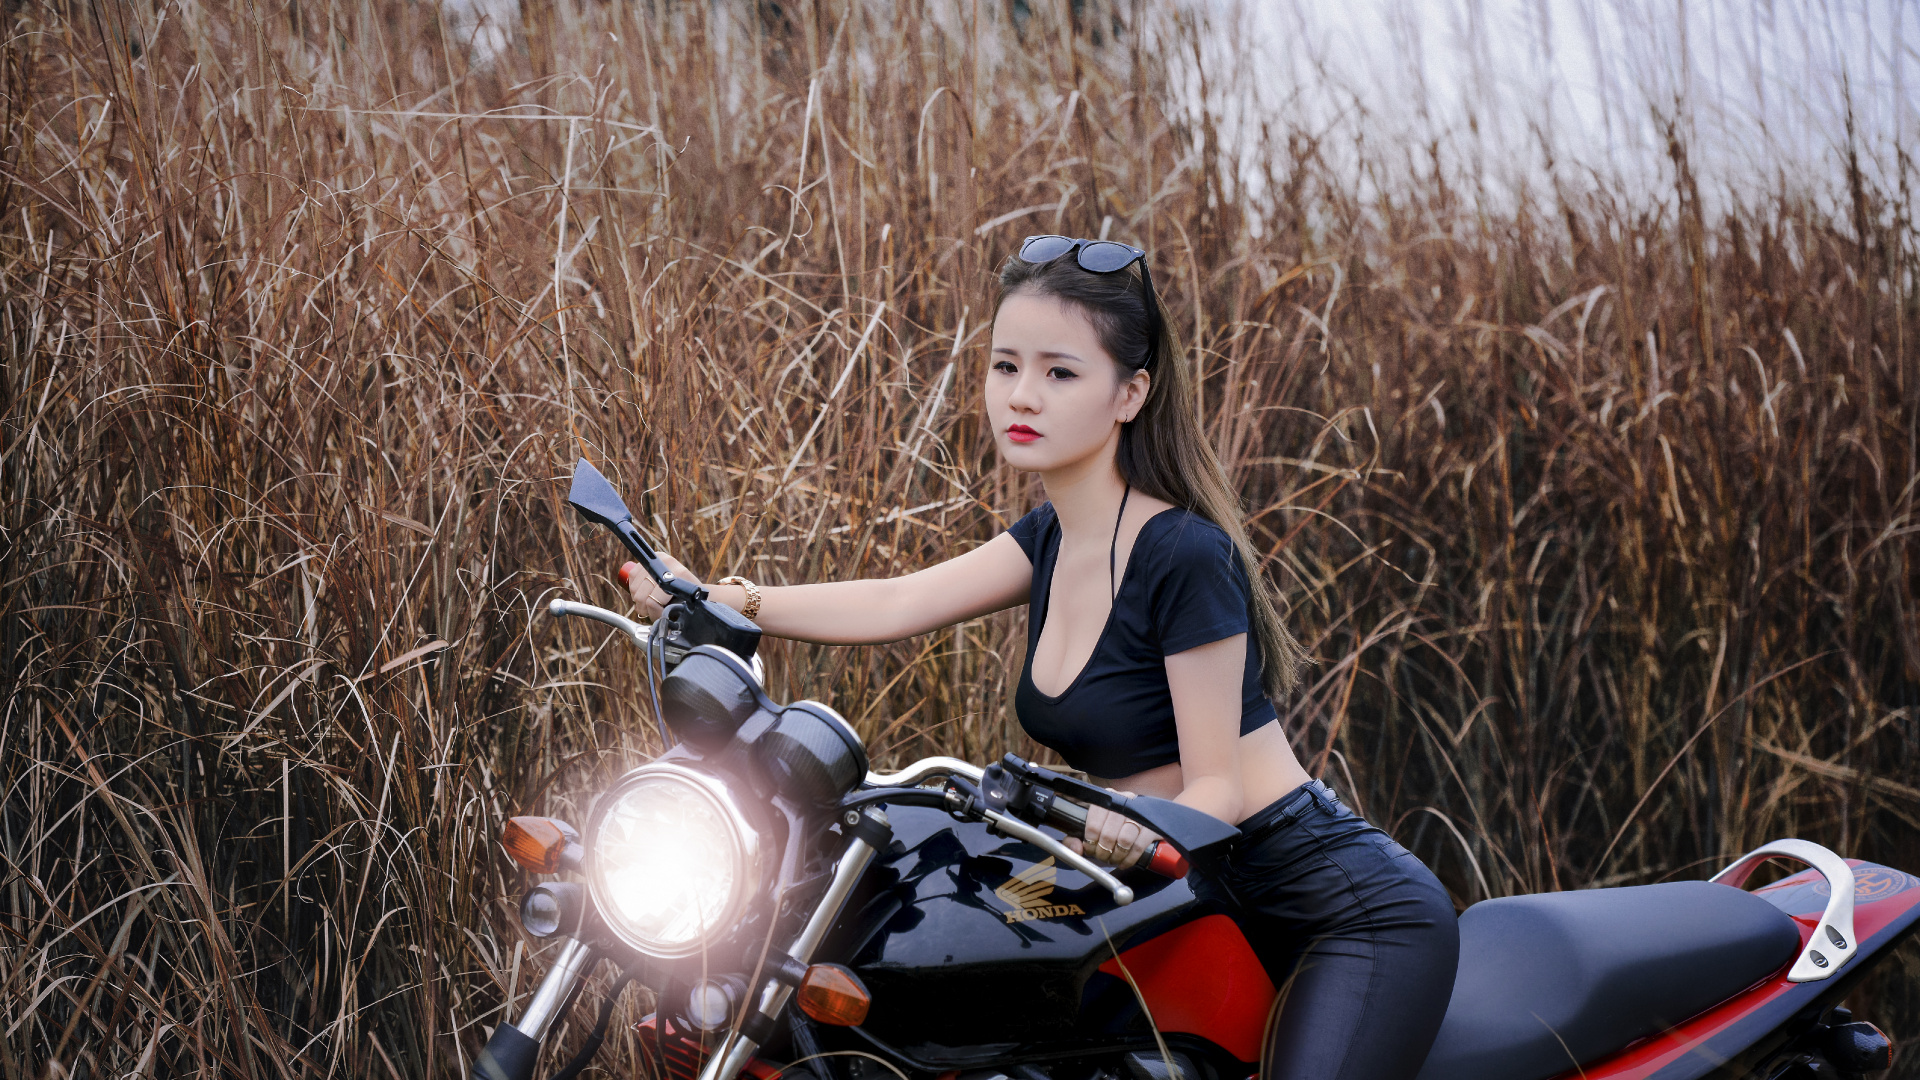 Woman in Black Tank Top and Black Leggings Sitting on Red and Black Motorcycle. Wallpaper in 1920x1080 Resolution